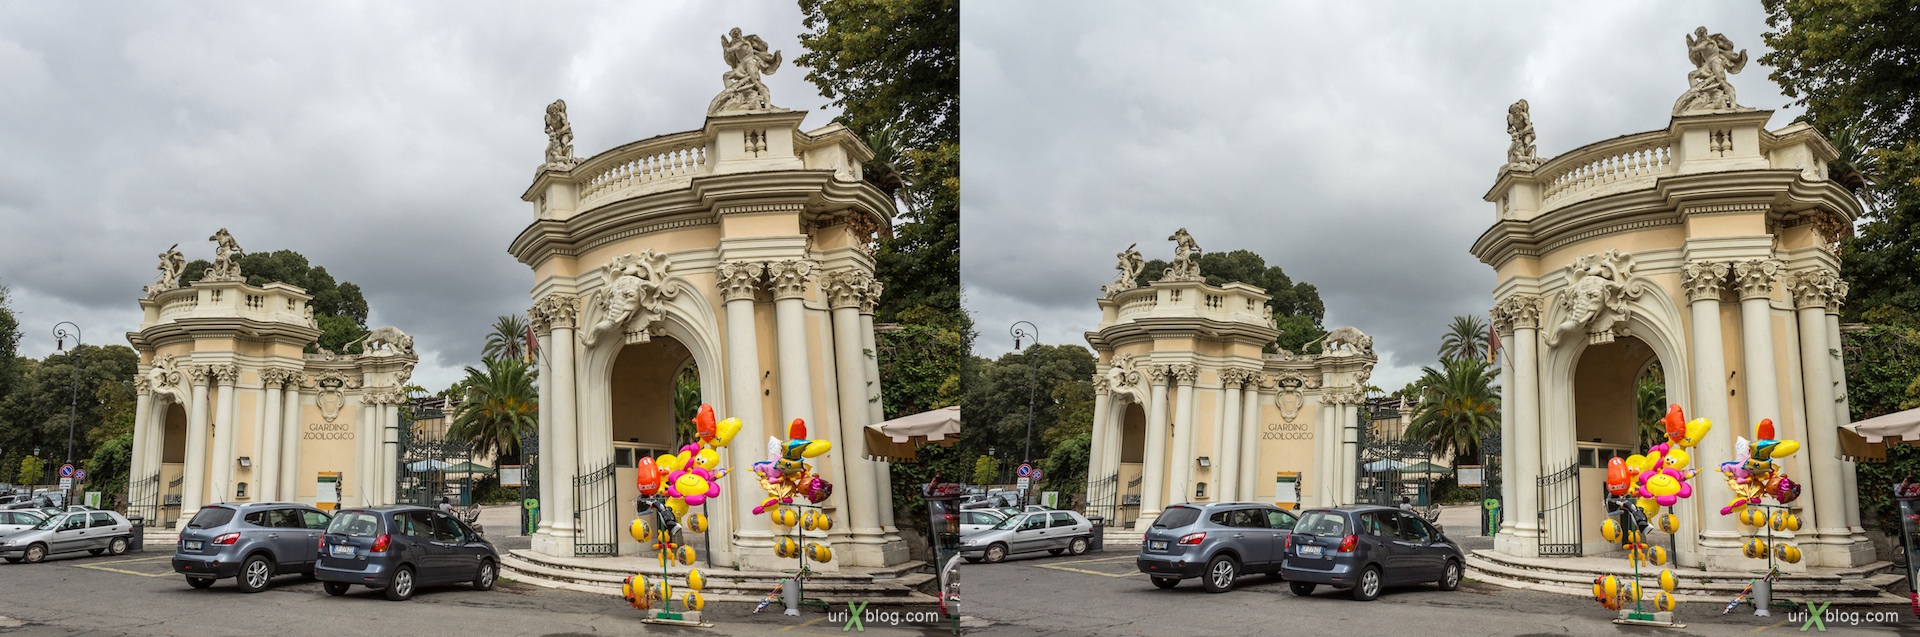 2012, park villa Borghese, Rome, Italy, 3D, stereo pair, cross-eyed, crossview, cross view stereo pair